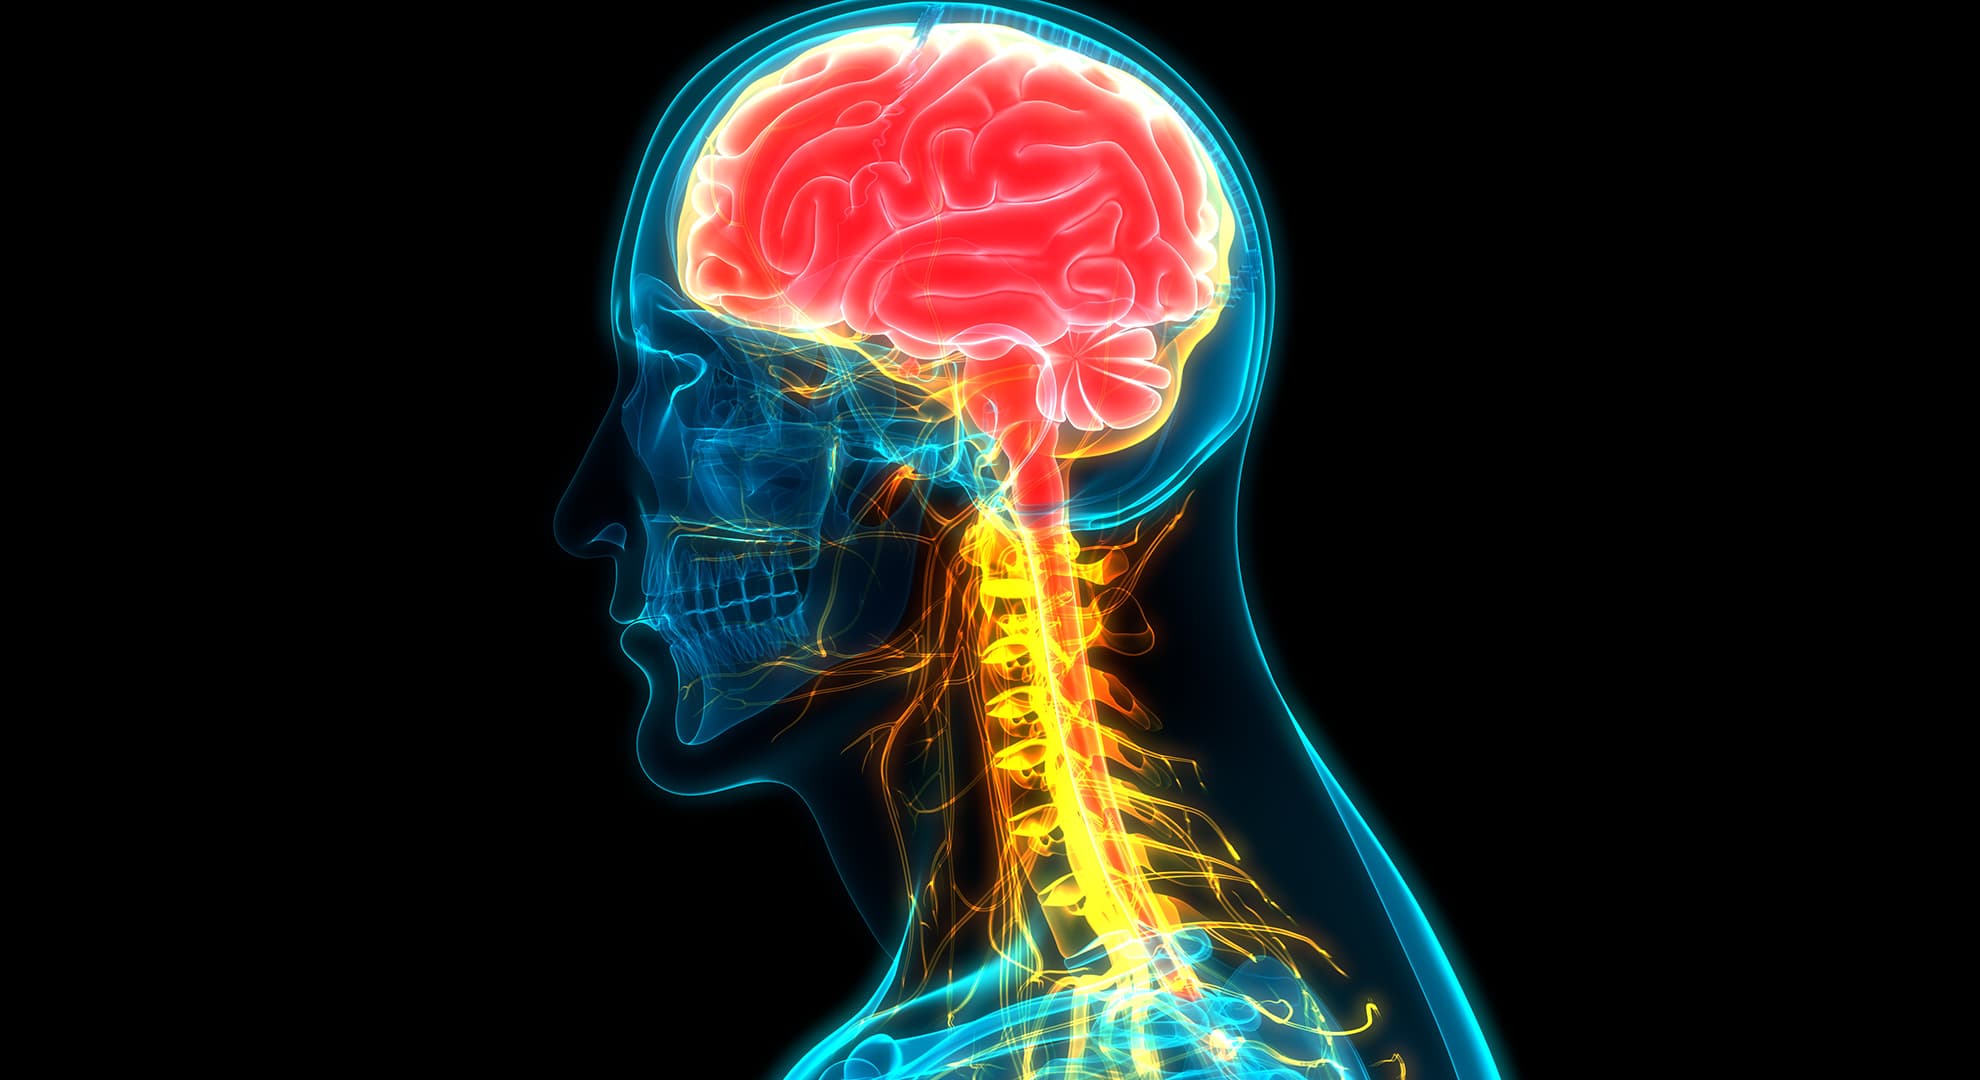 Digital rendering of a person's brain and spinal cord.